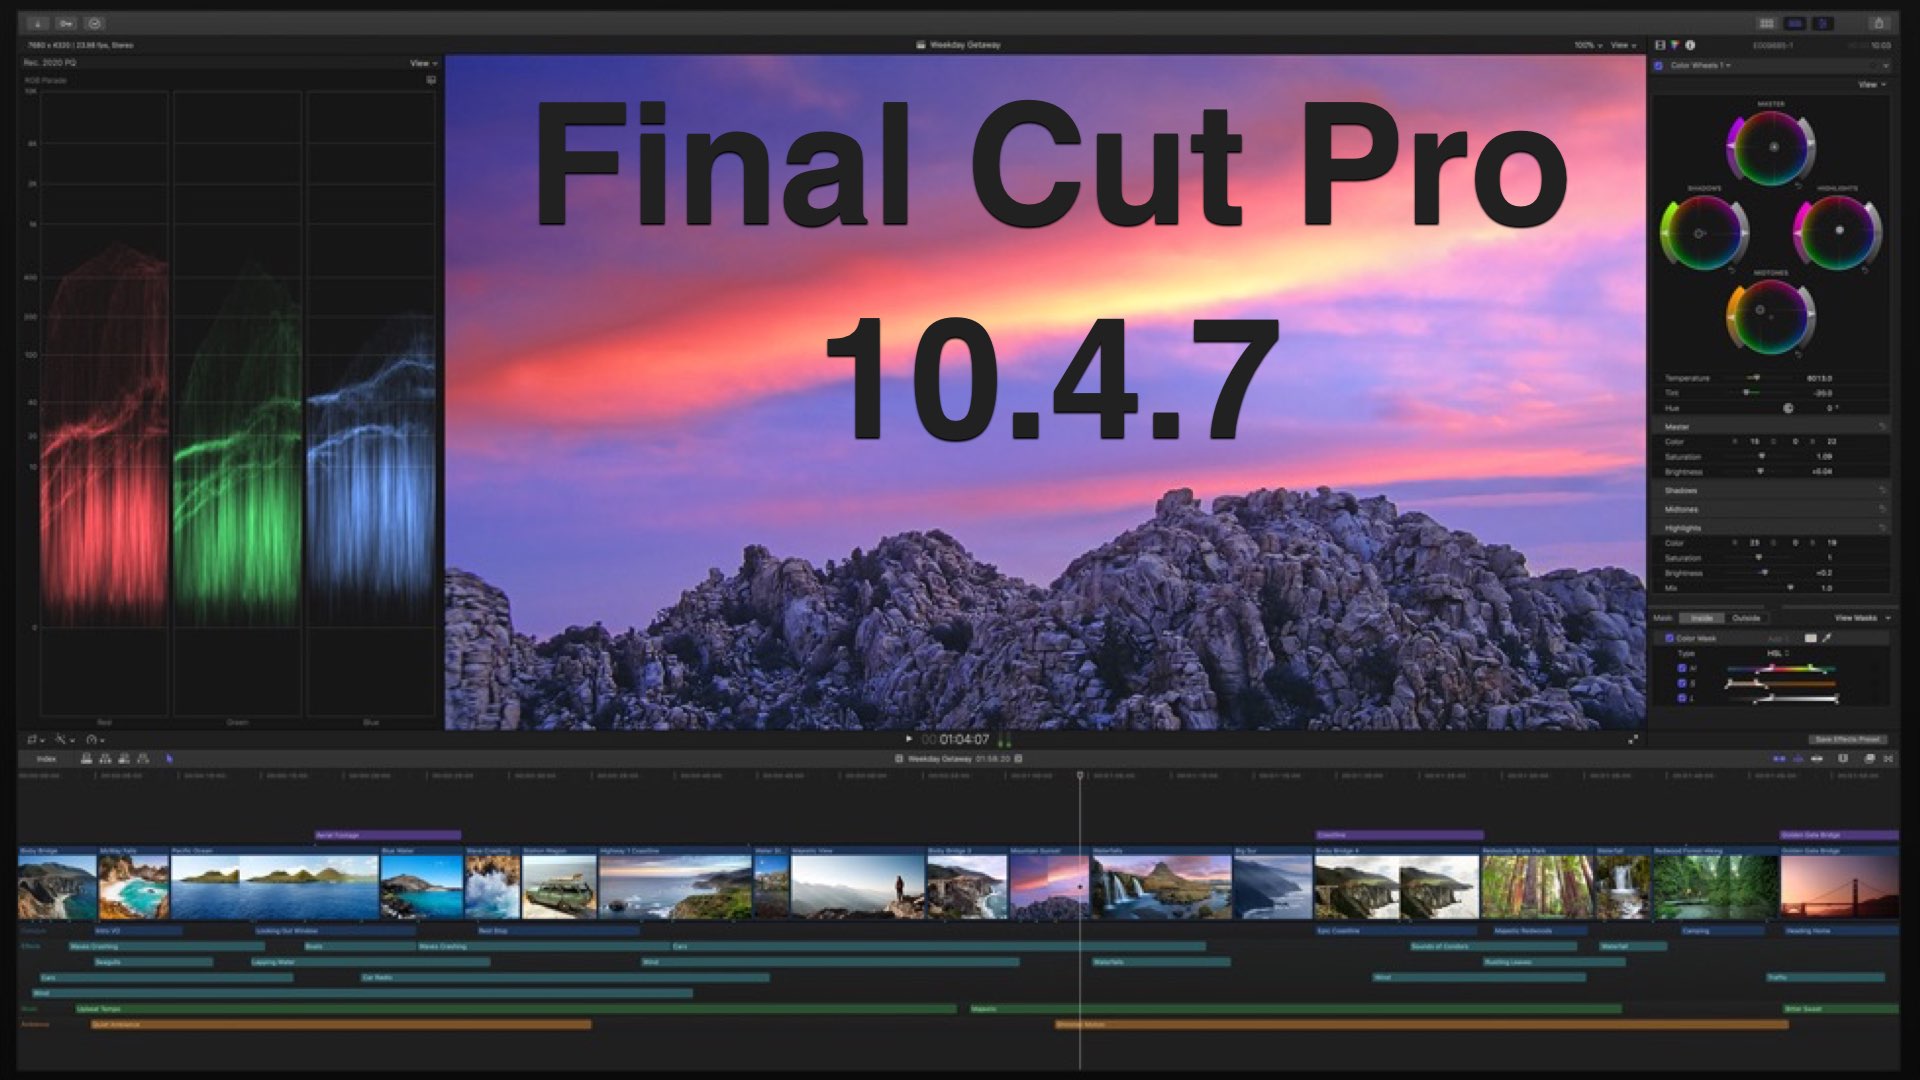 fcpx free download for windows 10